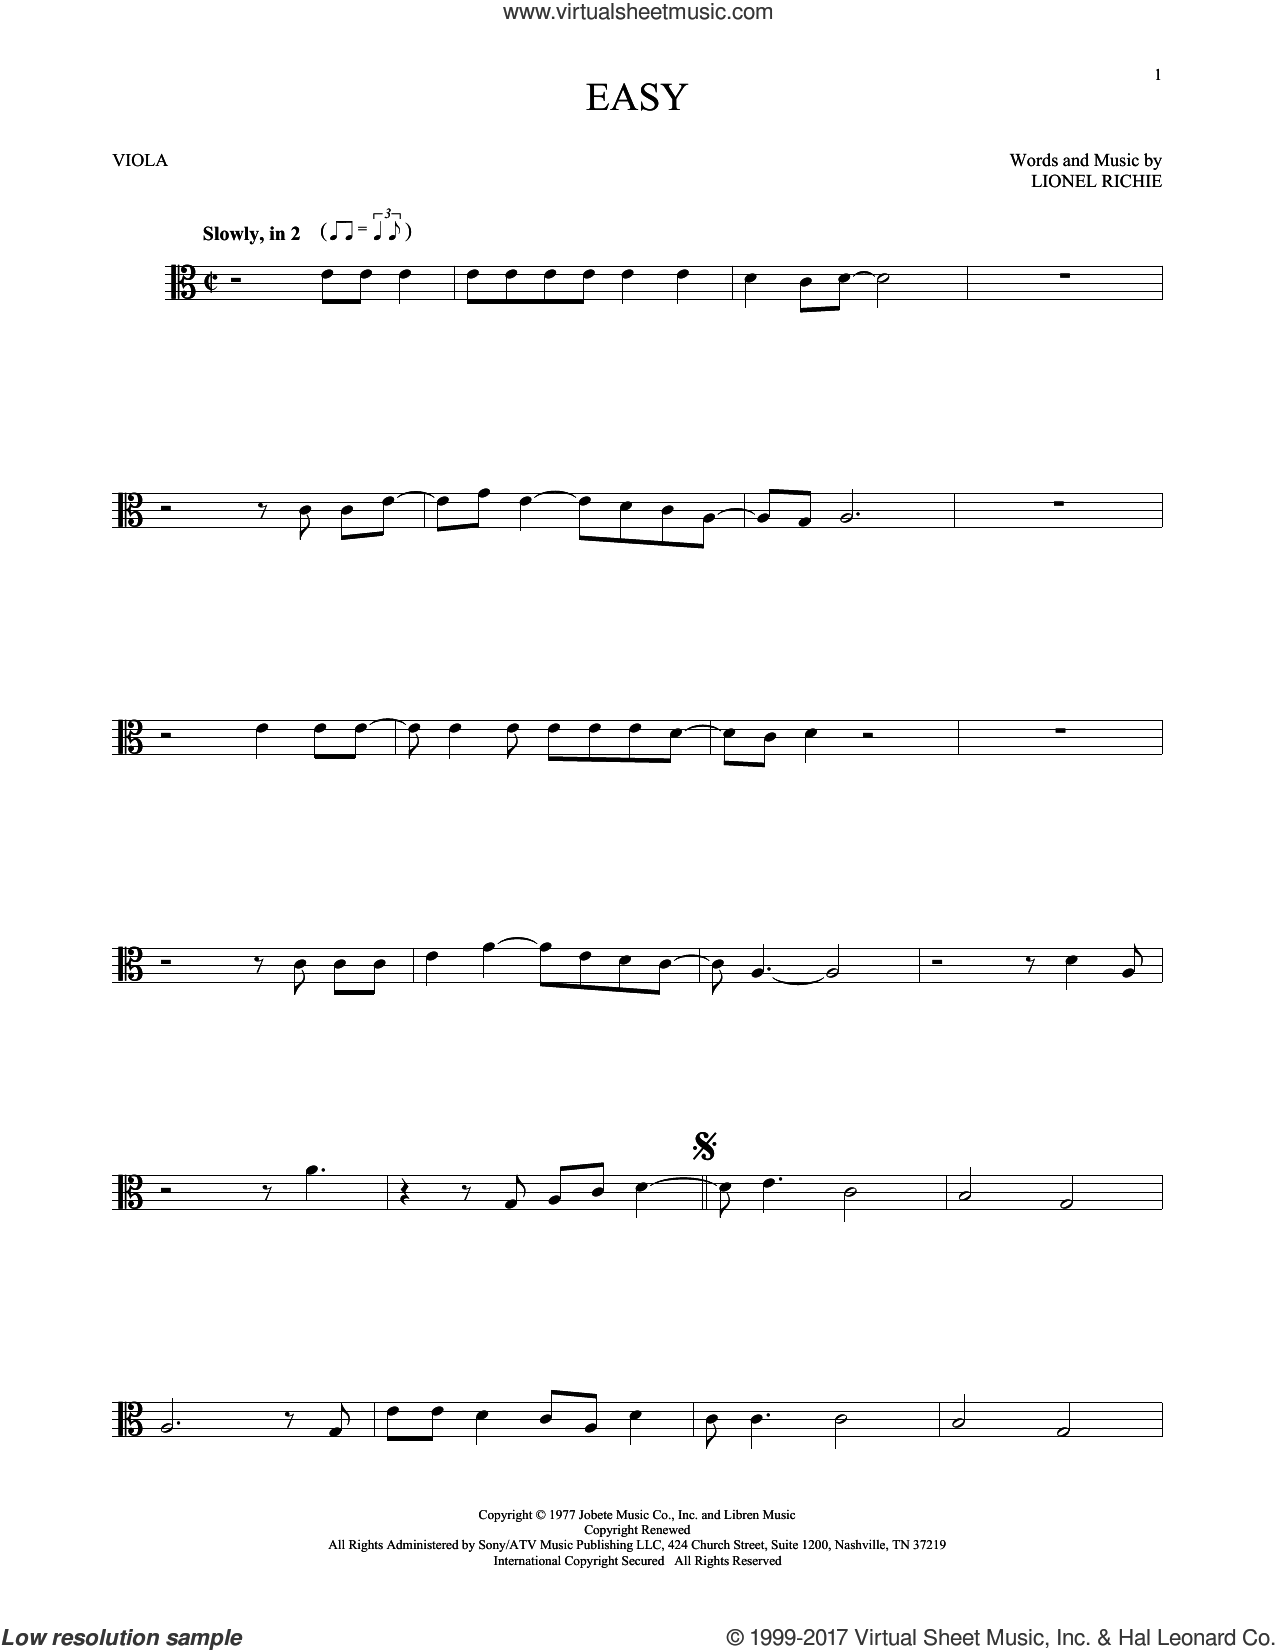 Nightshift sheet music for trumpet solo (PDF-interactive)